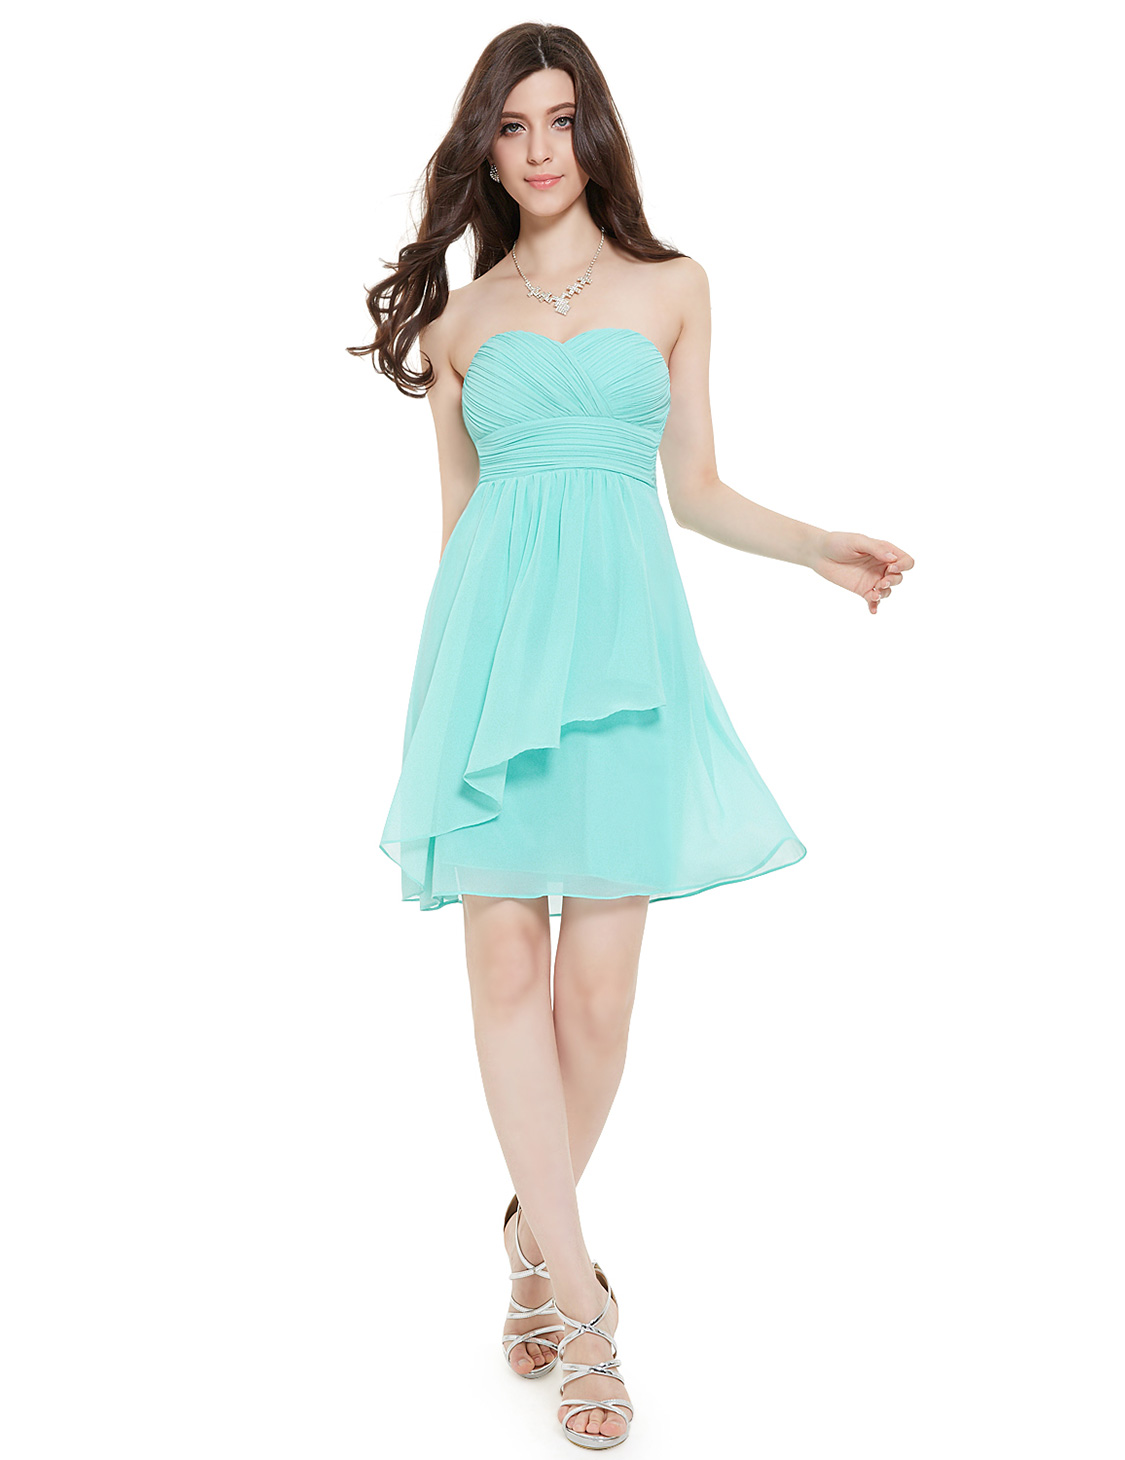 Strapless Short Chiffon Blue Cocktail Bridesmaid Dress Prom Party Gown ...